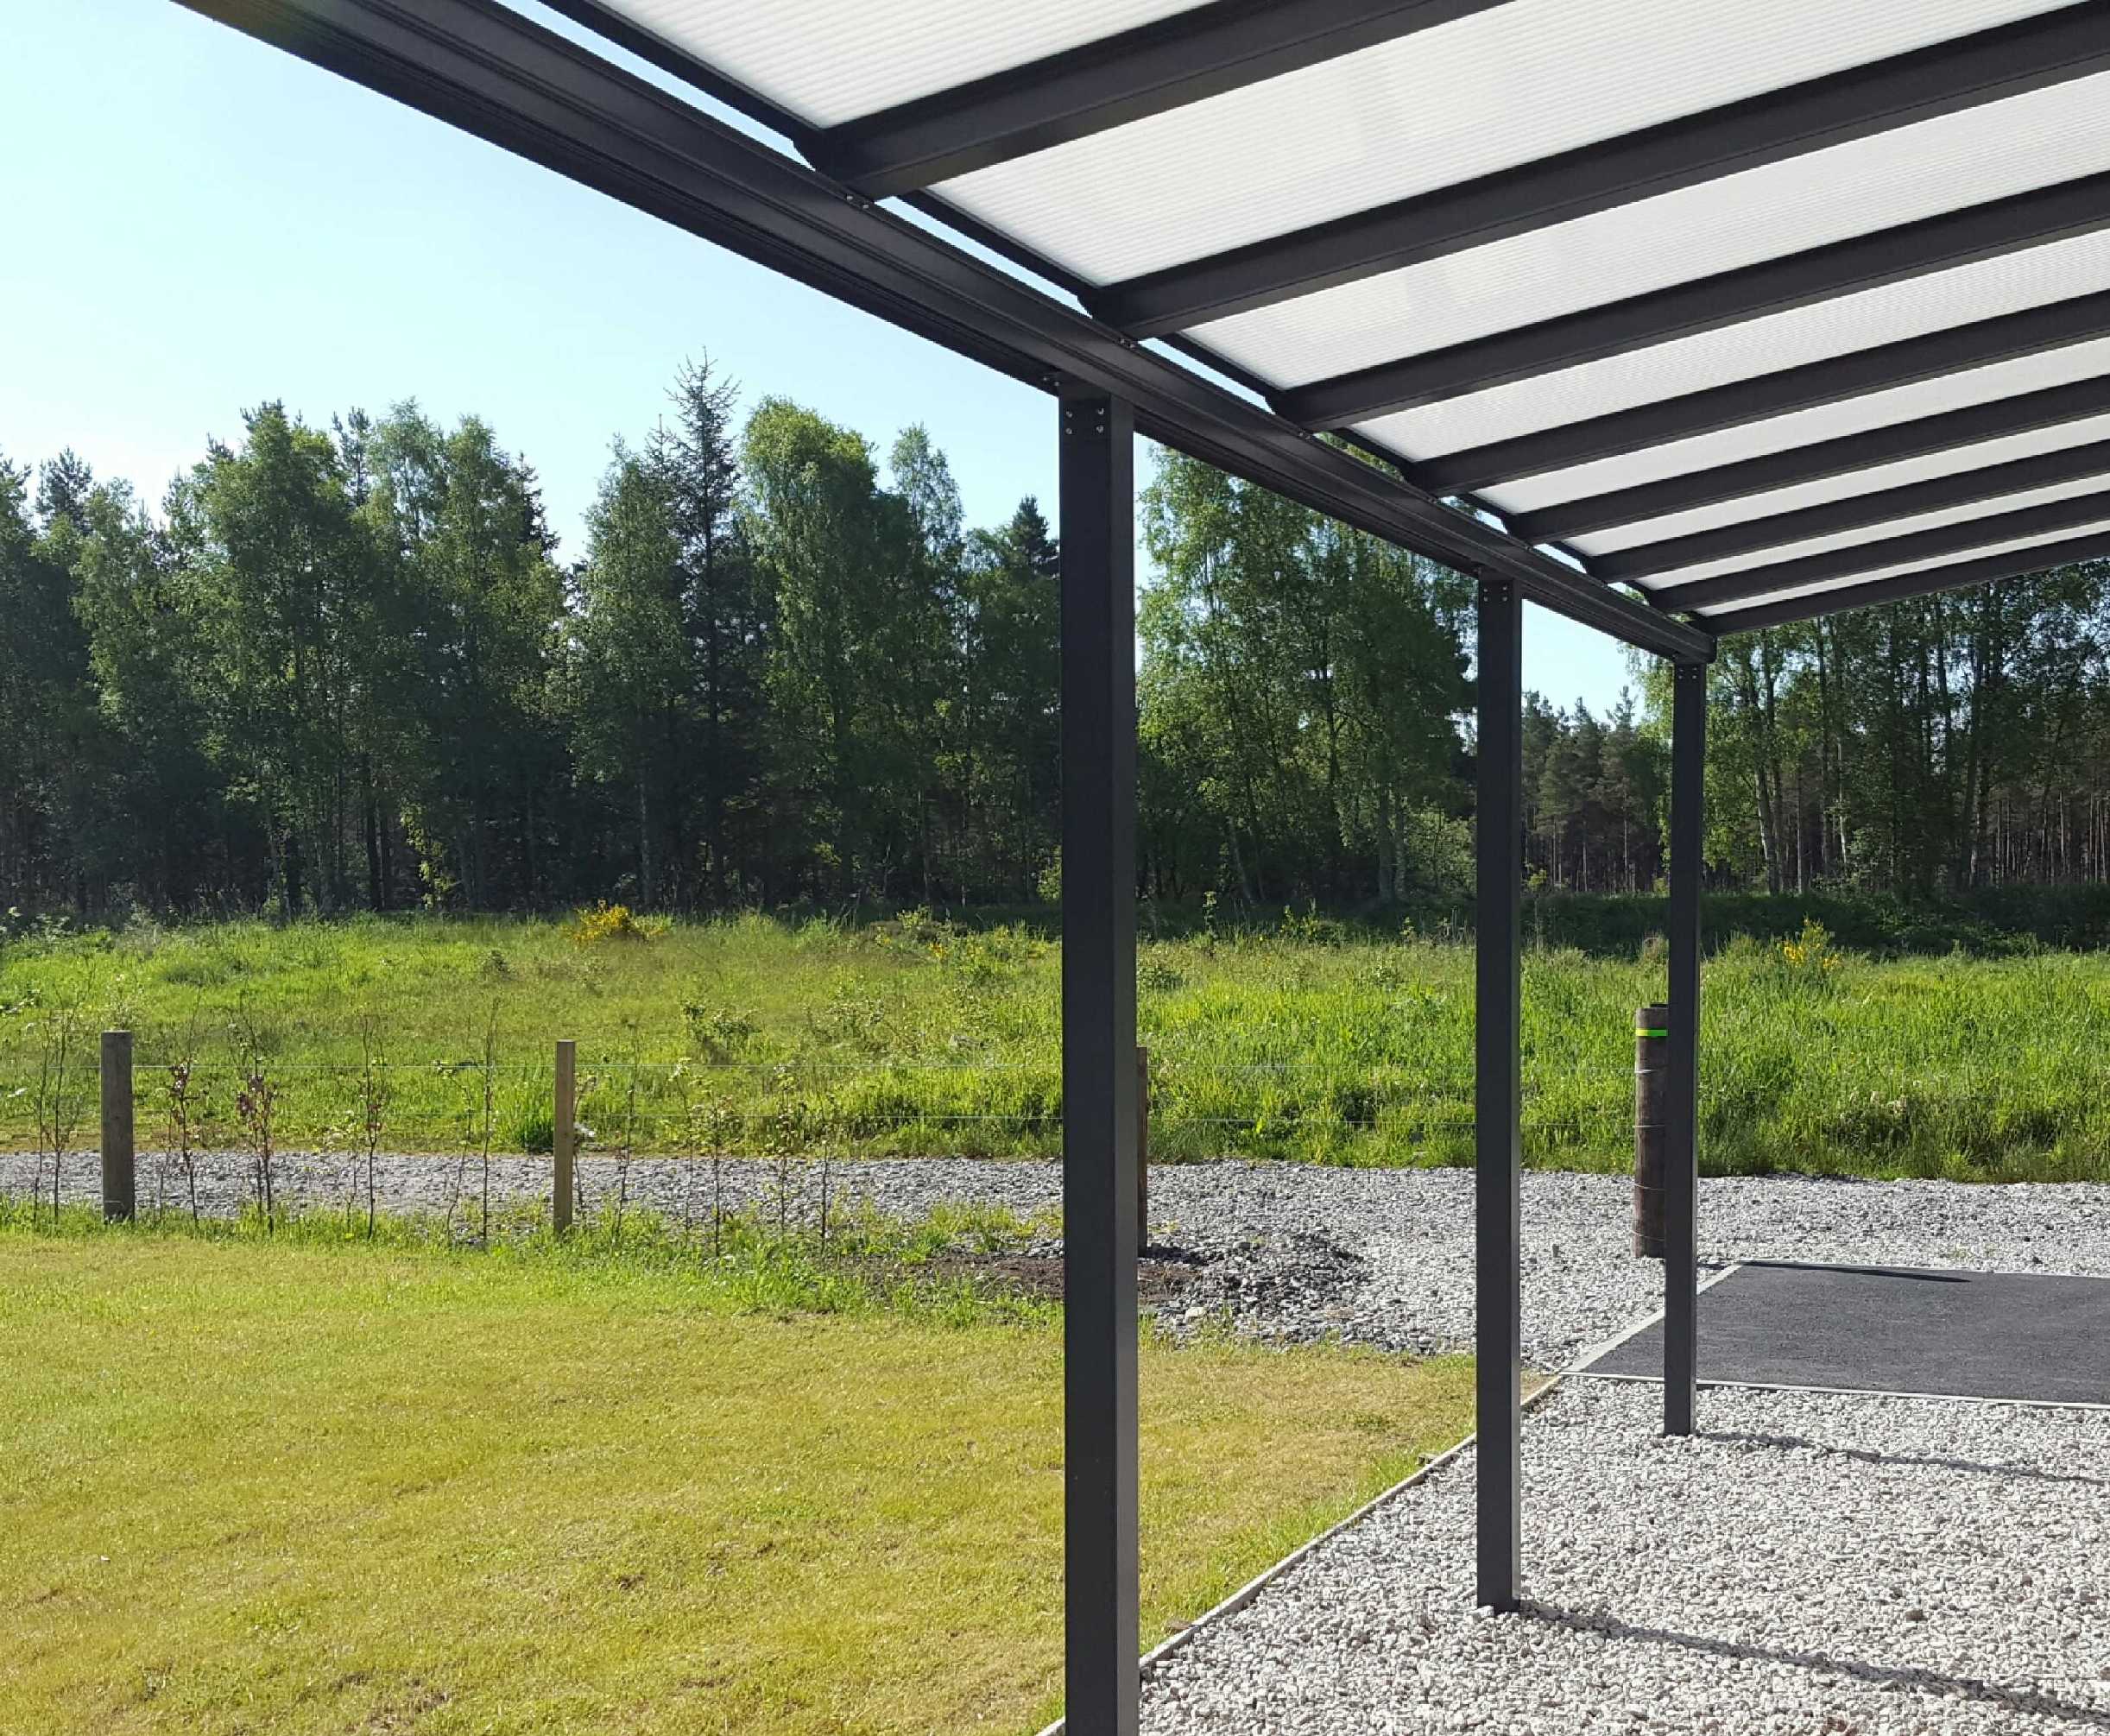 Omega Smart Lean-To Canopy, Anthracite Grey, 6mm Glass Clear Plate Polycarbonate Glazing - 4.2m (W) x 2.0m (P), (3) Supporting Posts